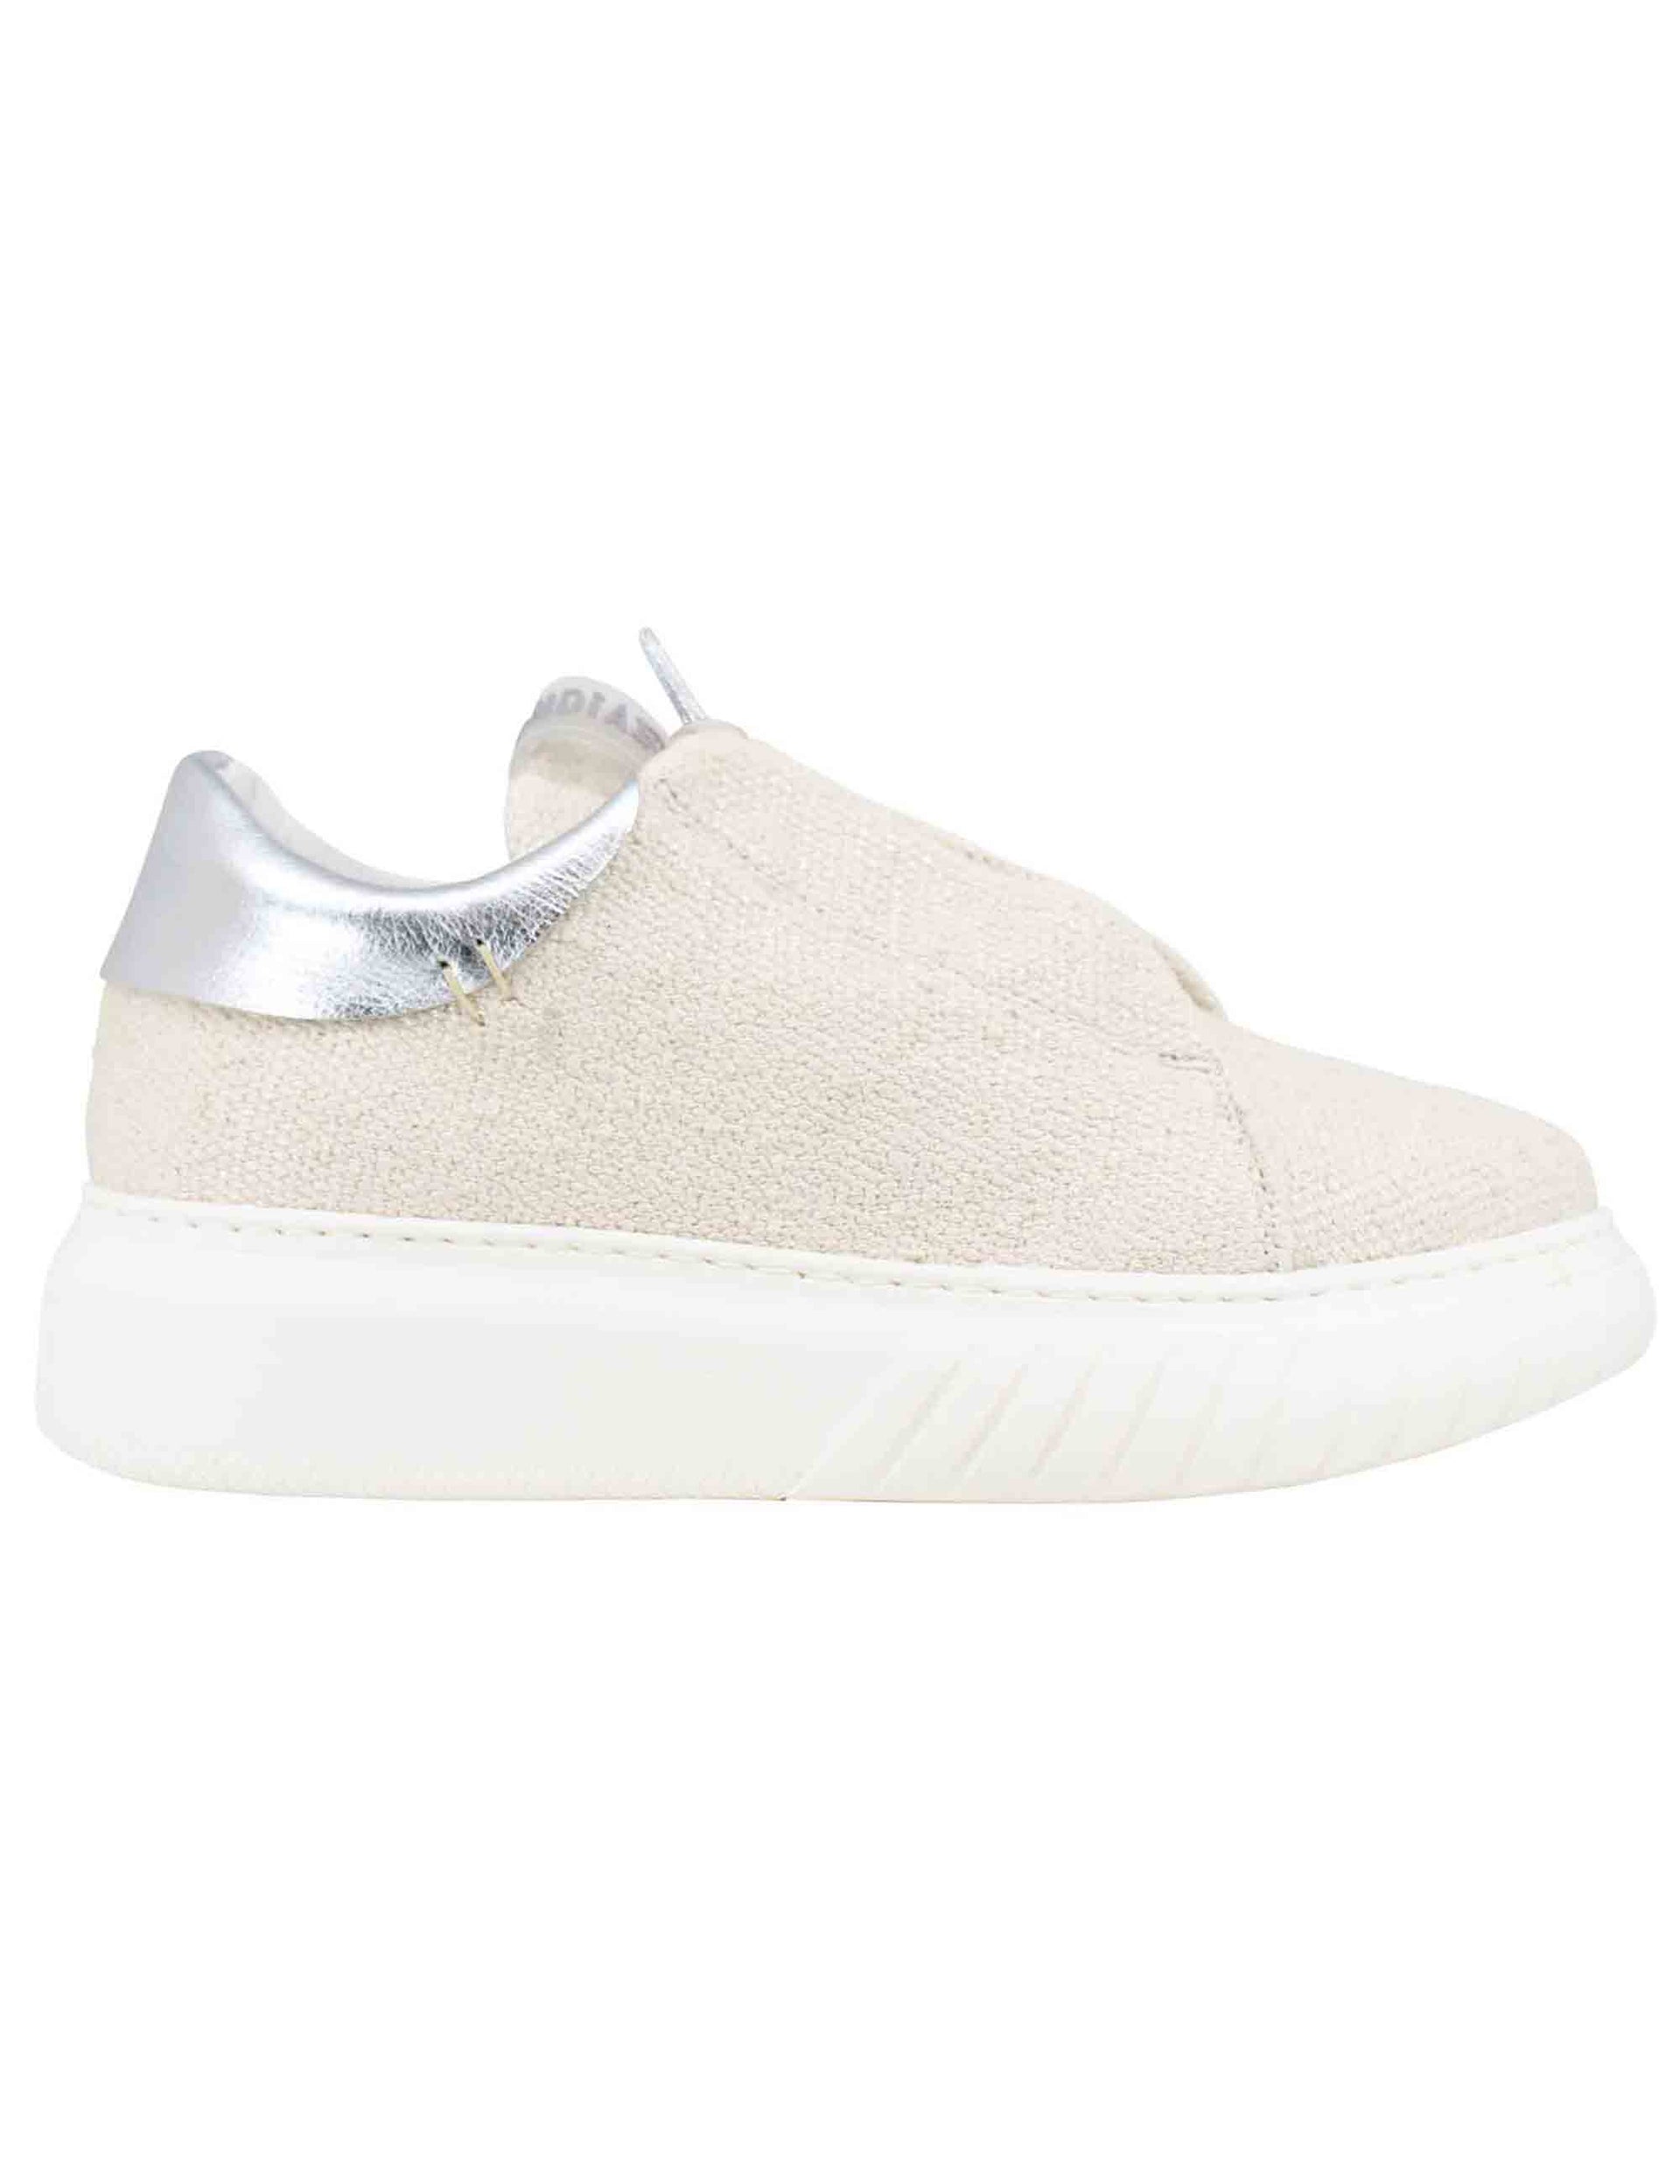 Women's sneakers in beige fabric with high rubber sole